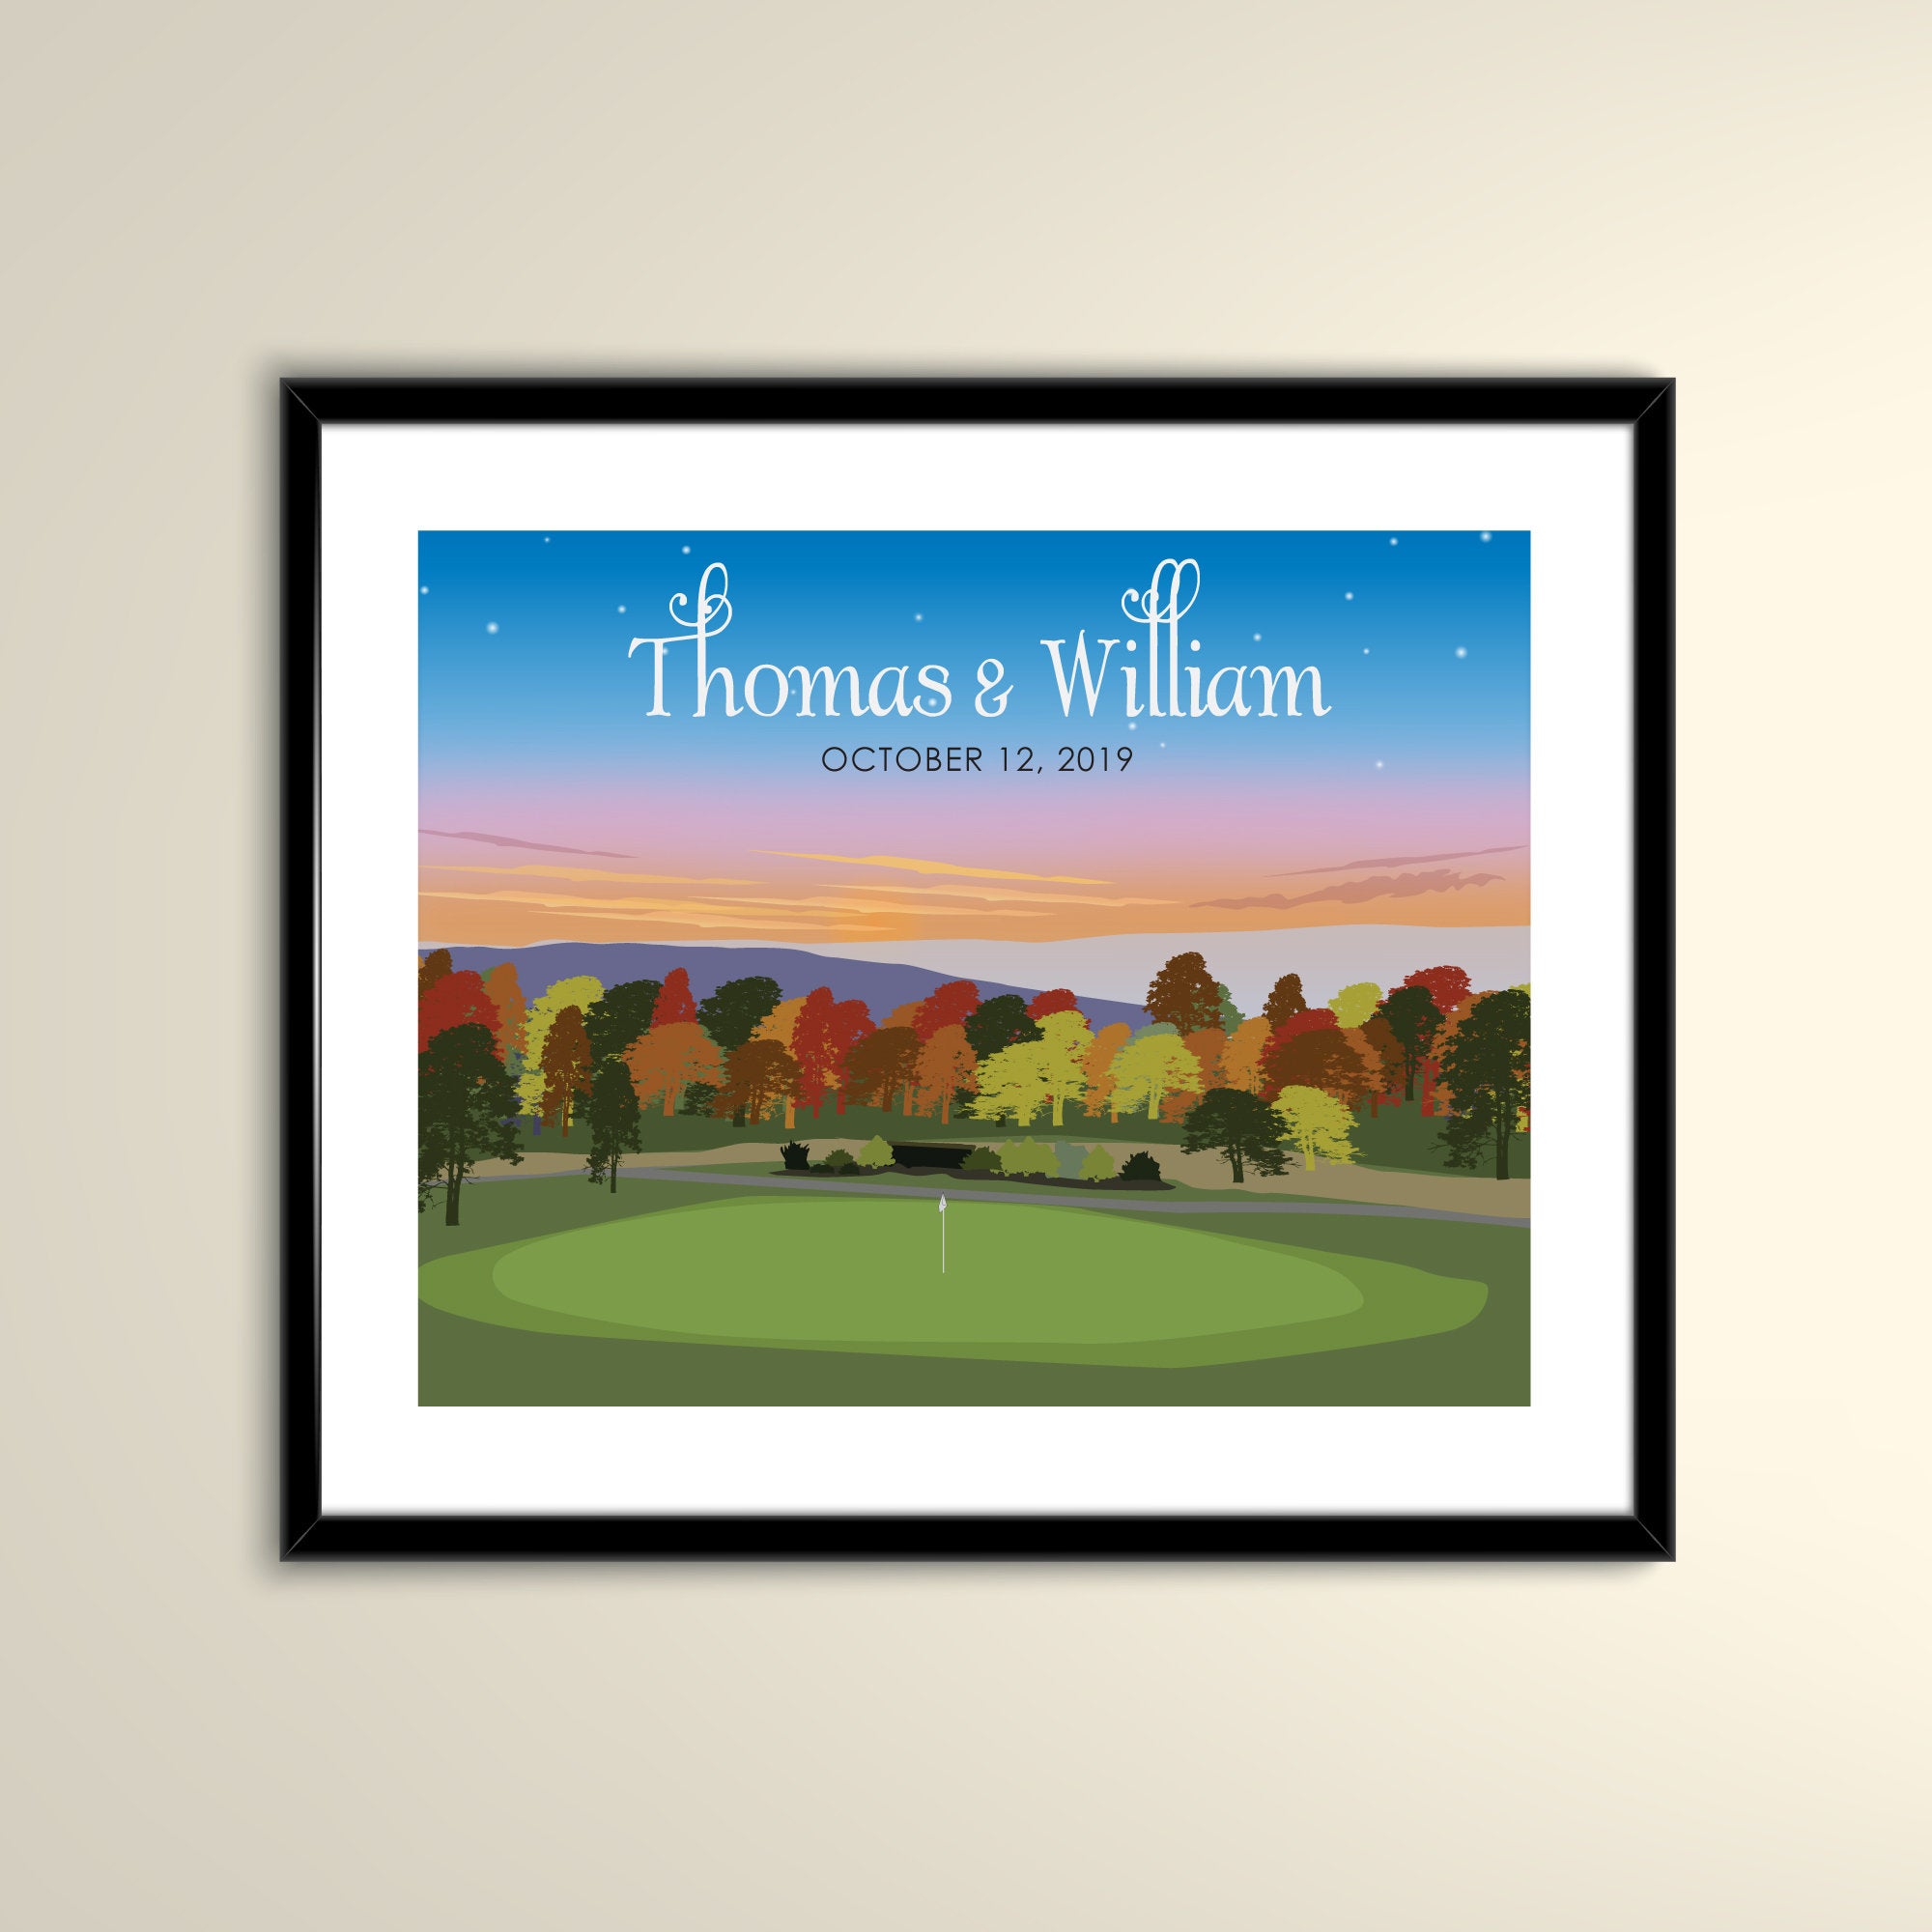 Golf Country Club 14x11 Vintage Poster / Wedding Poster personalized with Names and date (frame not included)